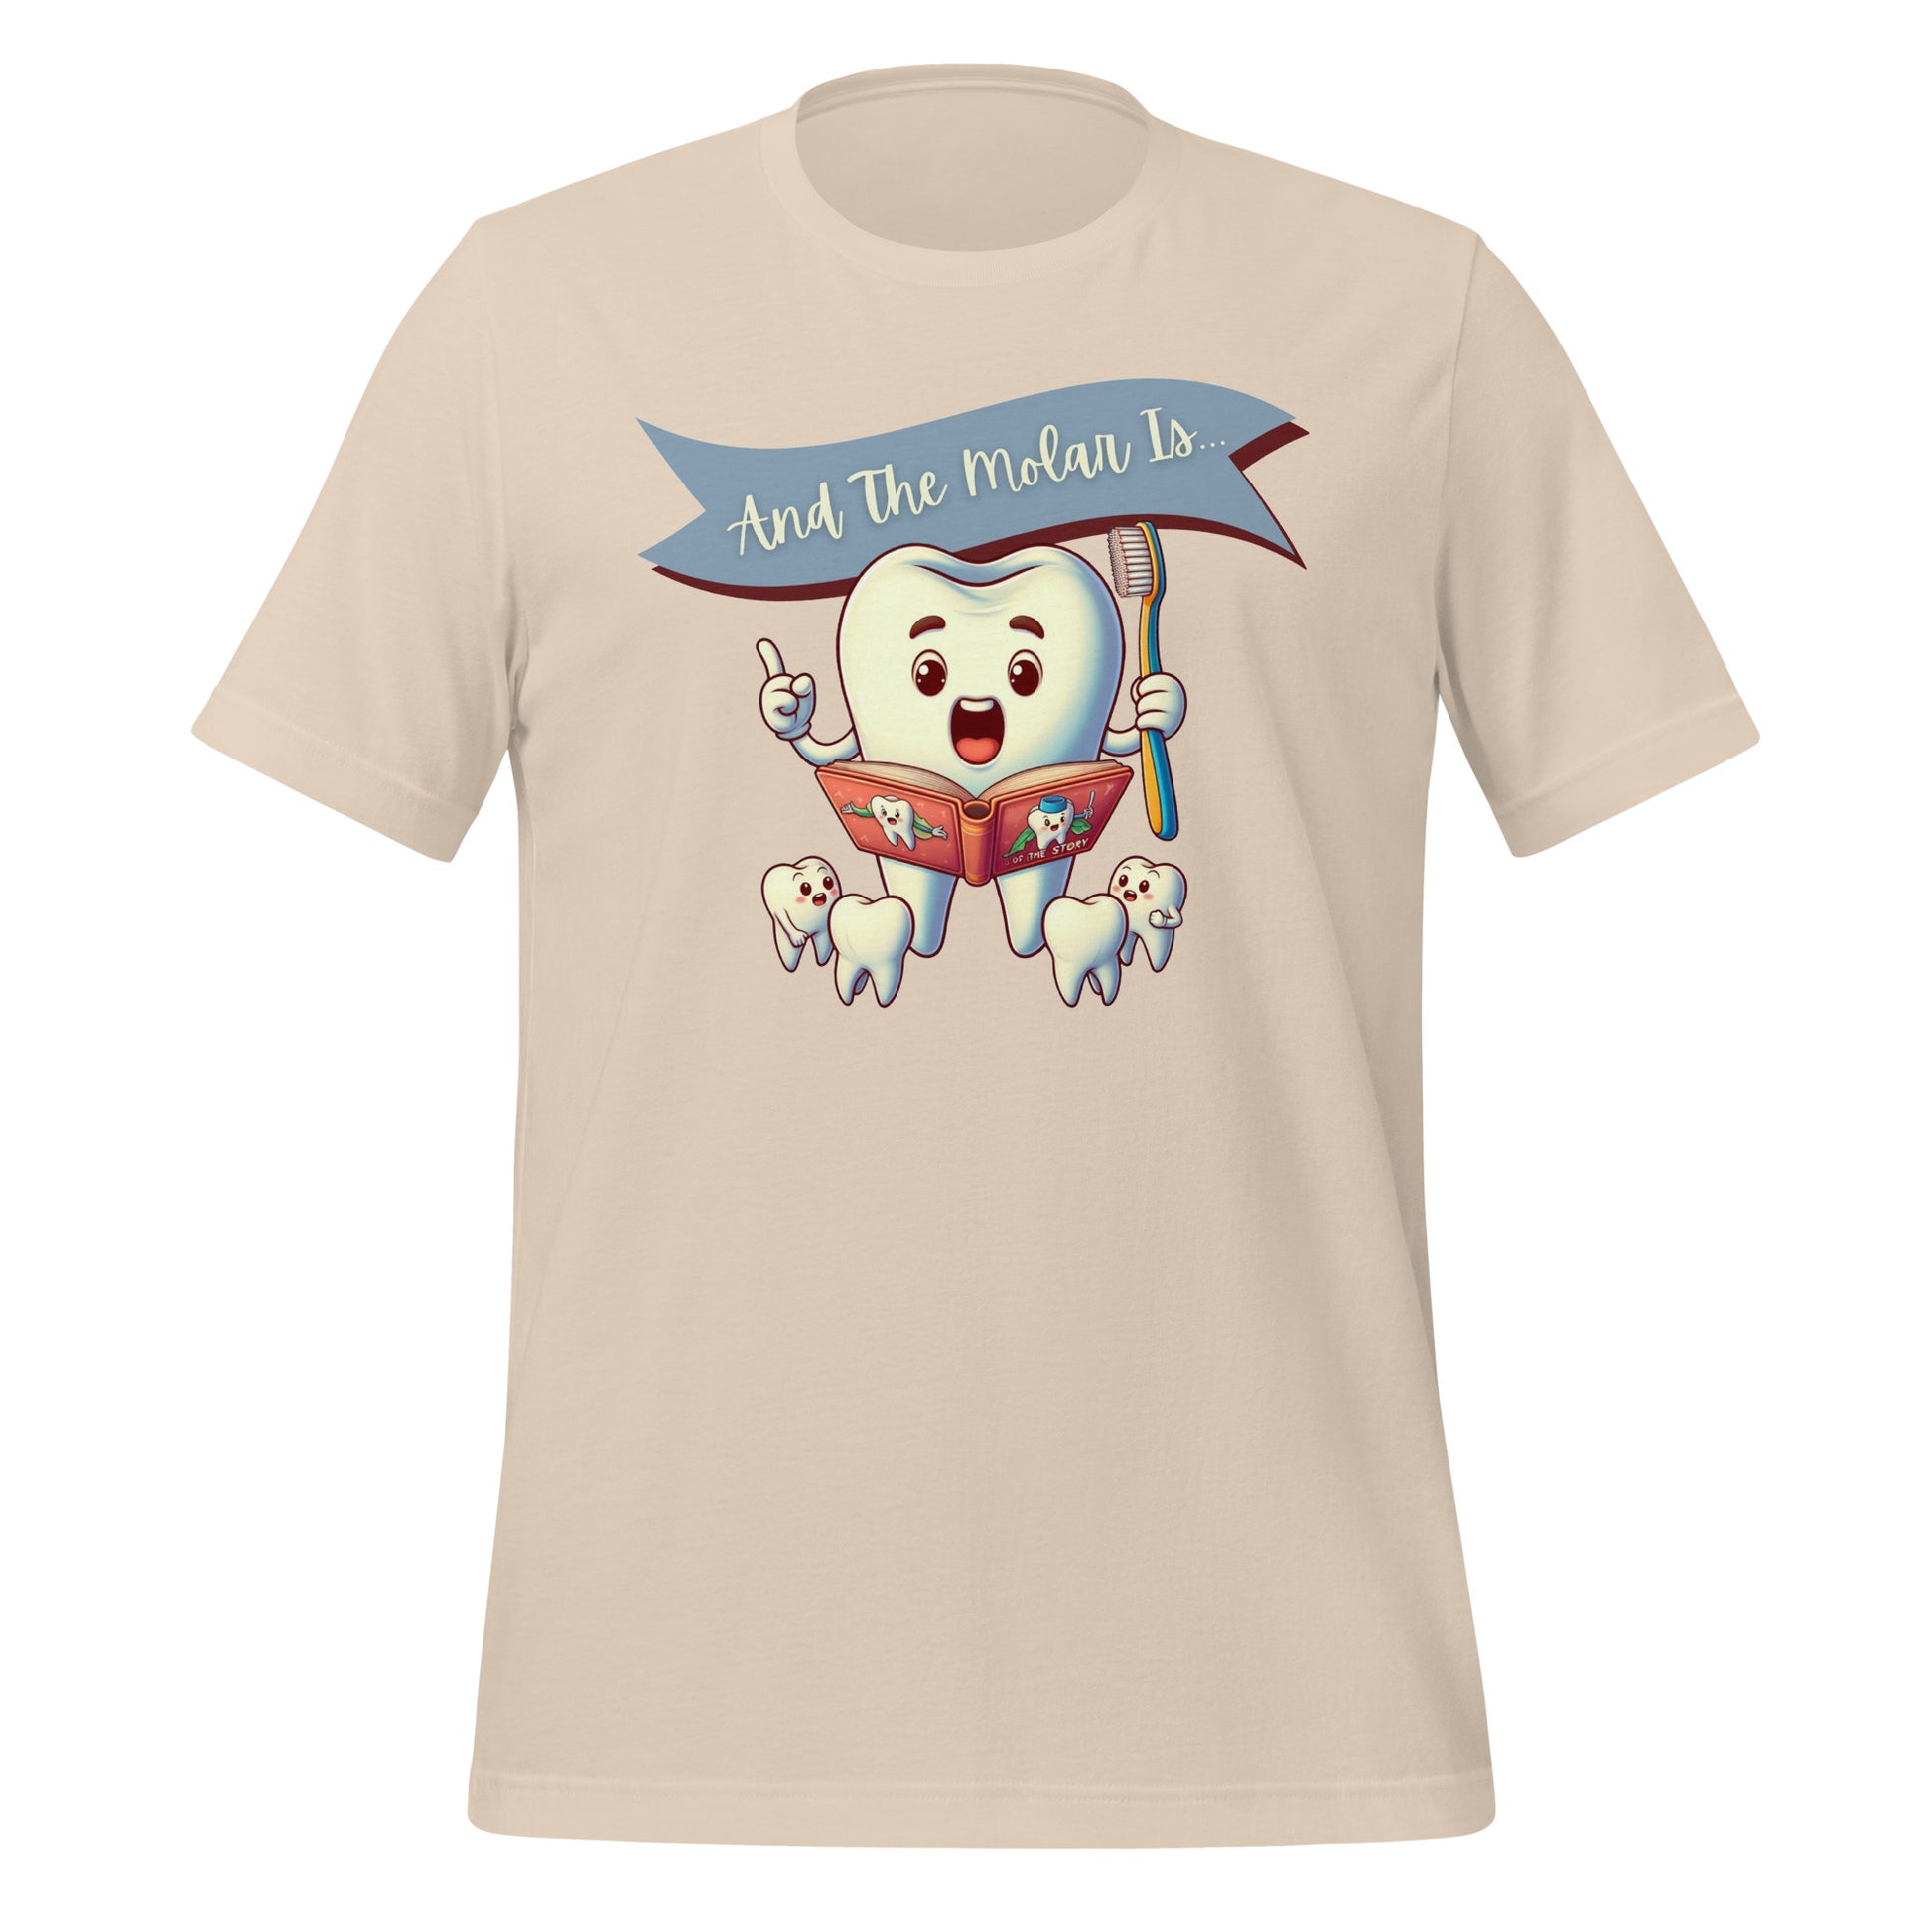 Cute dental shirt featuring a smiling tooth character reading a book with the caption ‘And The Molar Is,’ surrounded by smaller tooth characters. Soft cream color.